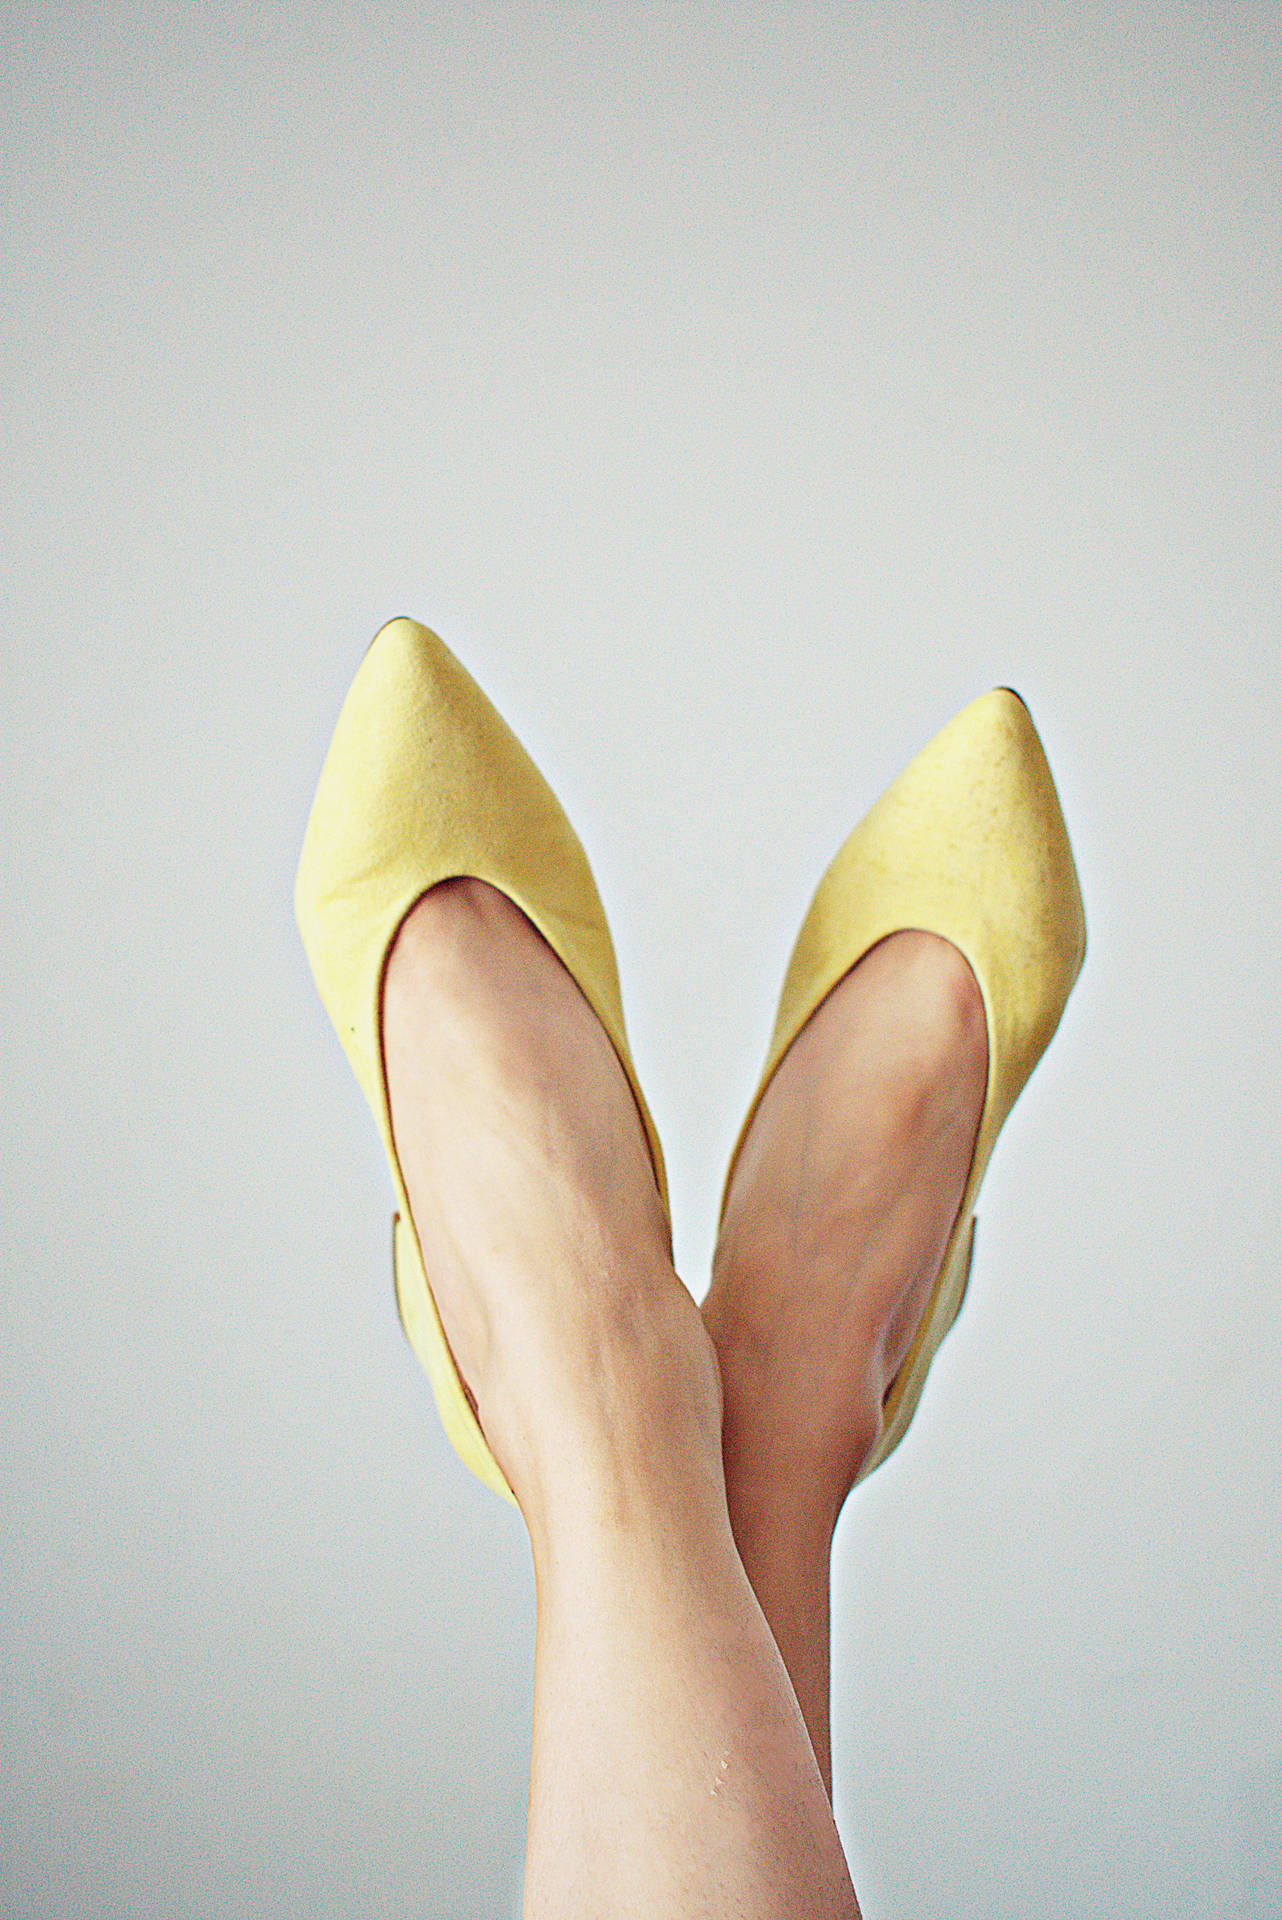 Pointy Toed Yellow Shoes Background